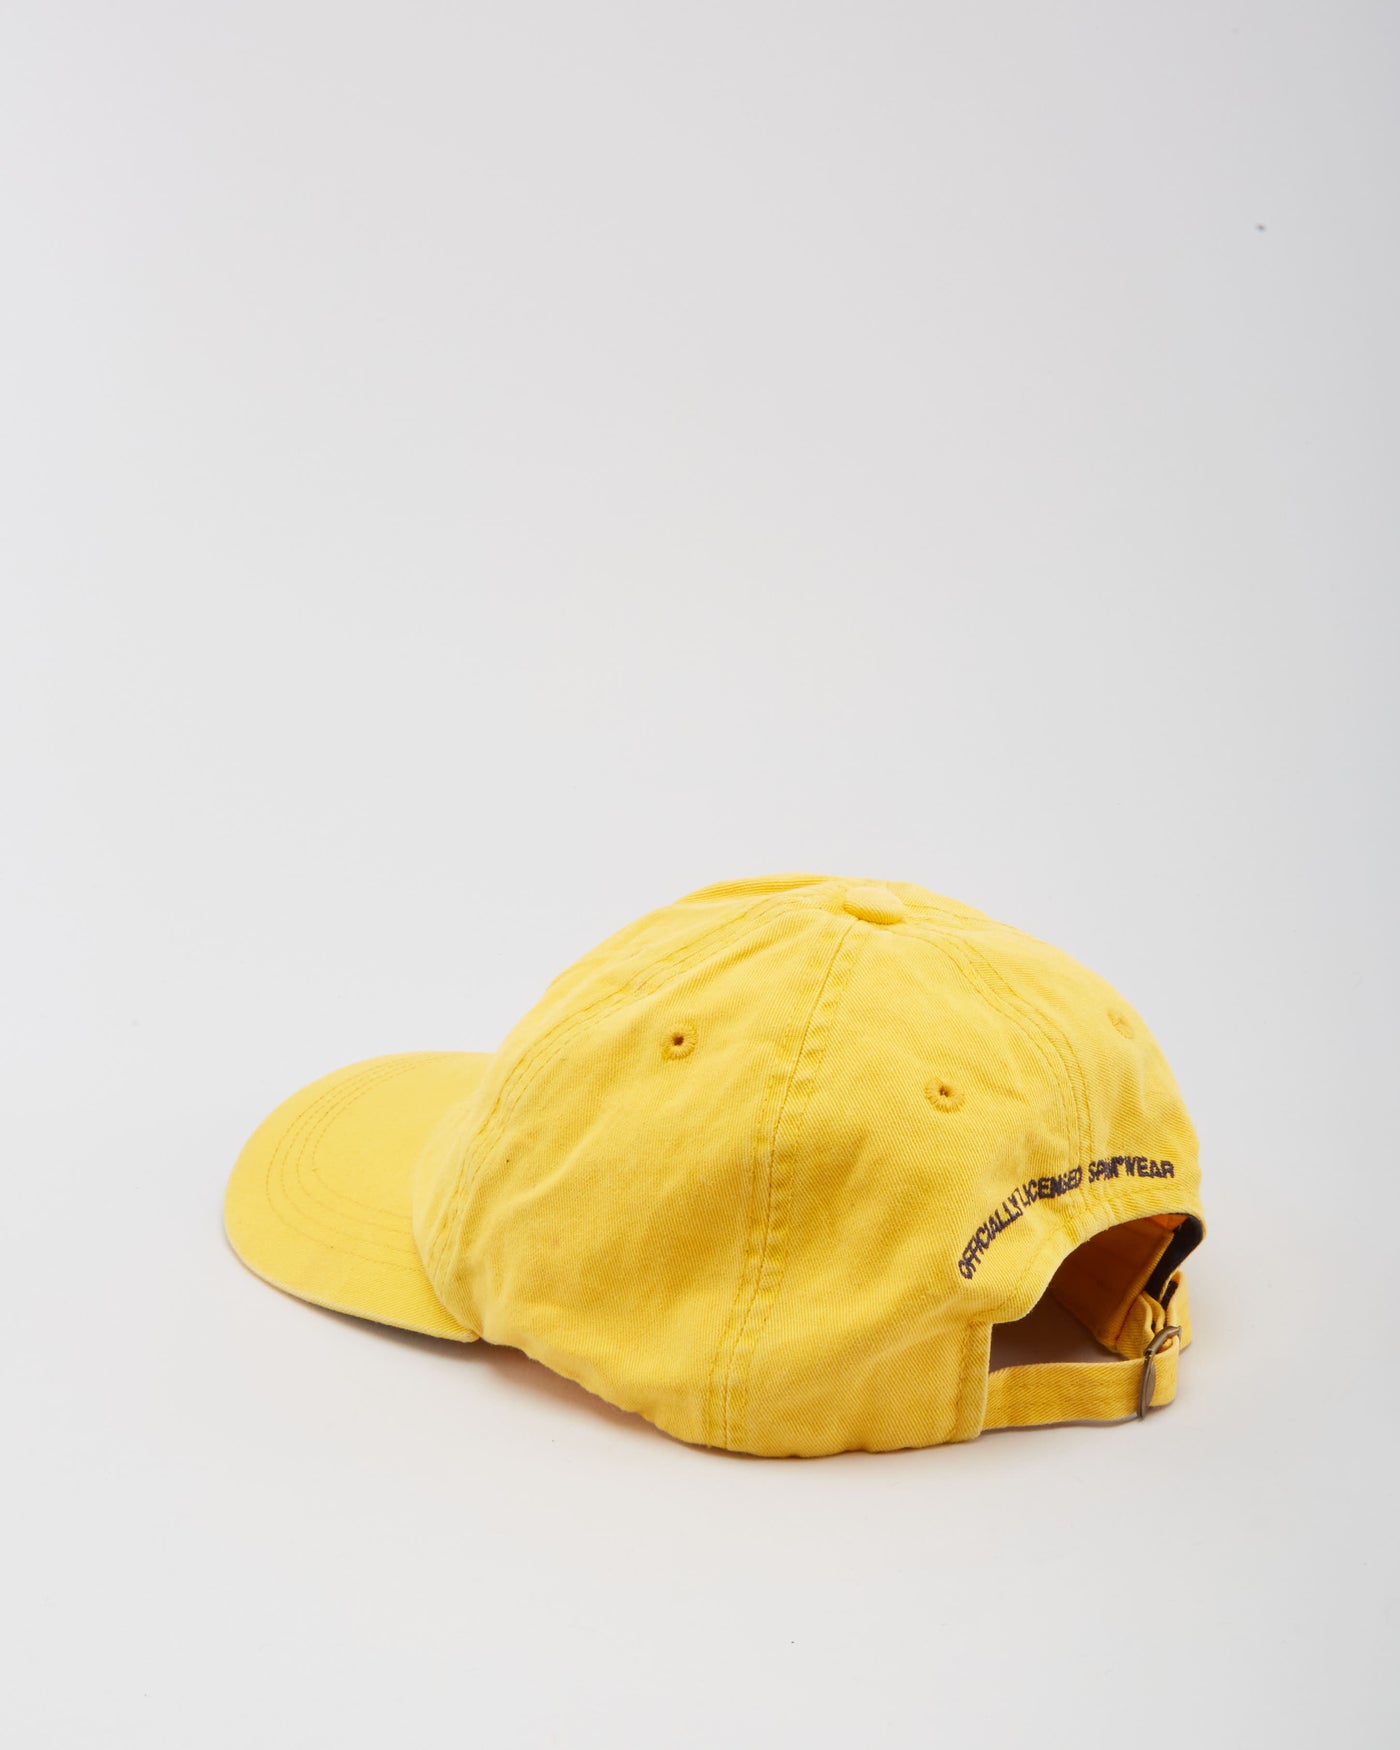 Vintage Spam 'Officially Licenced Spamwear' Yellow Baseball Cap